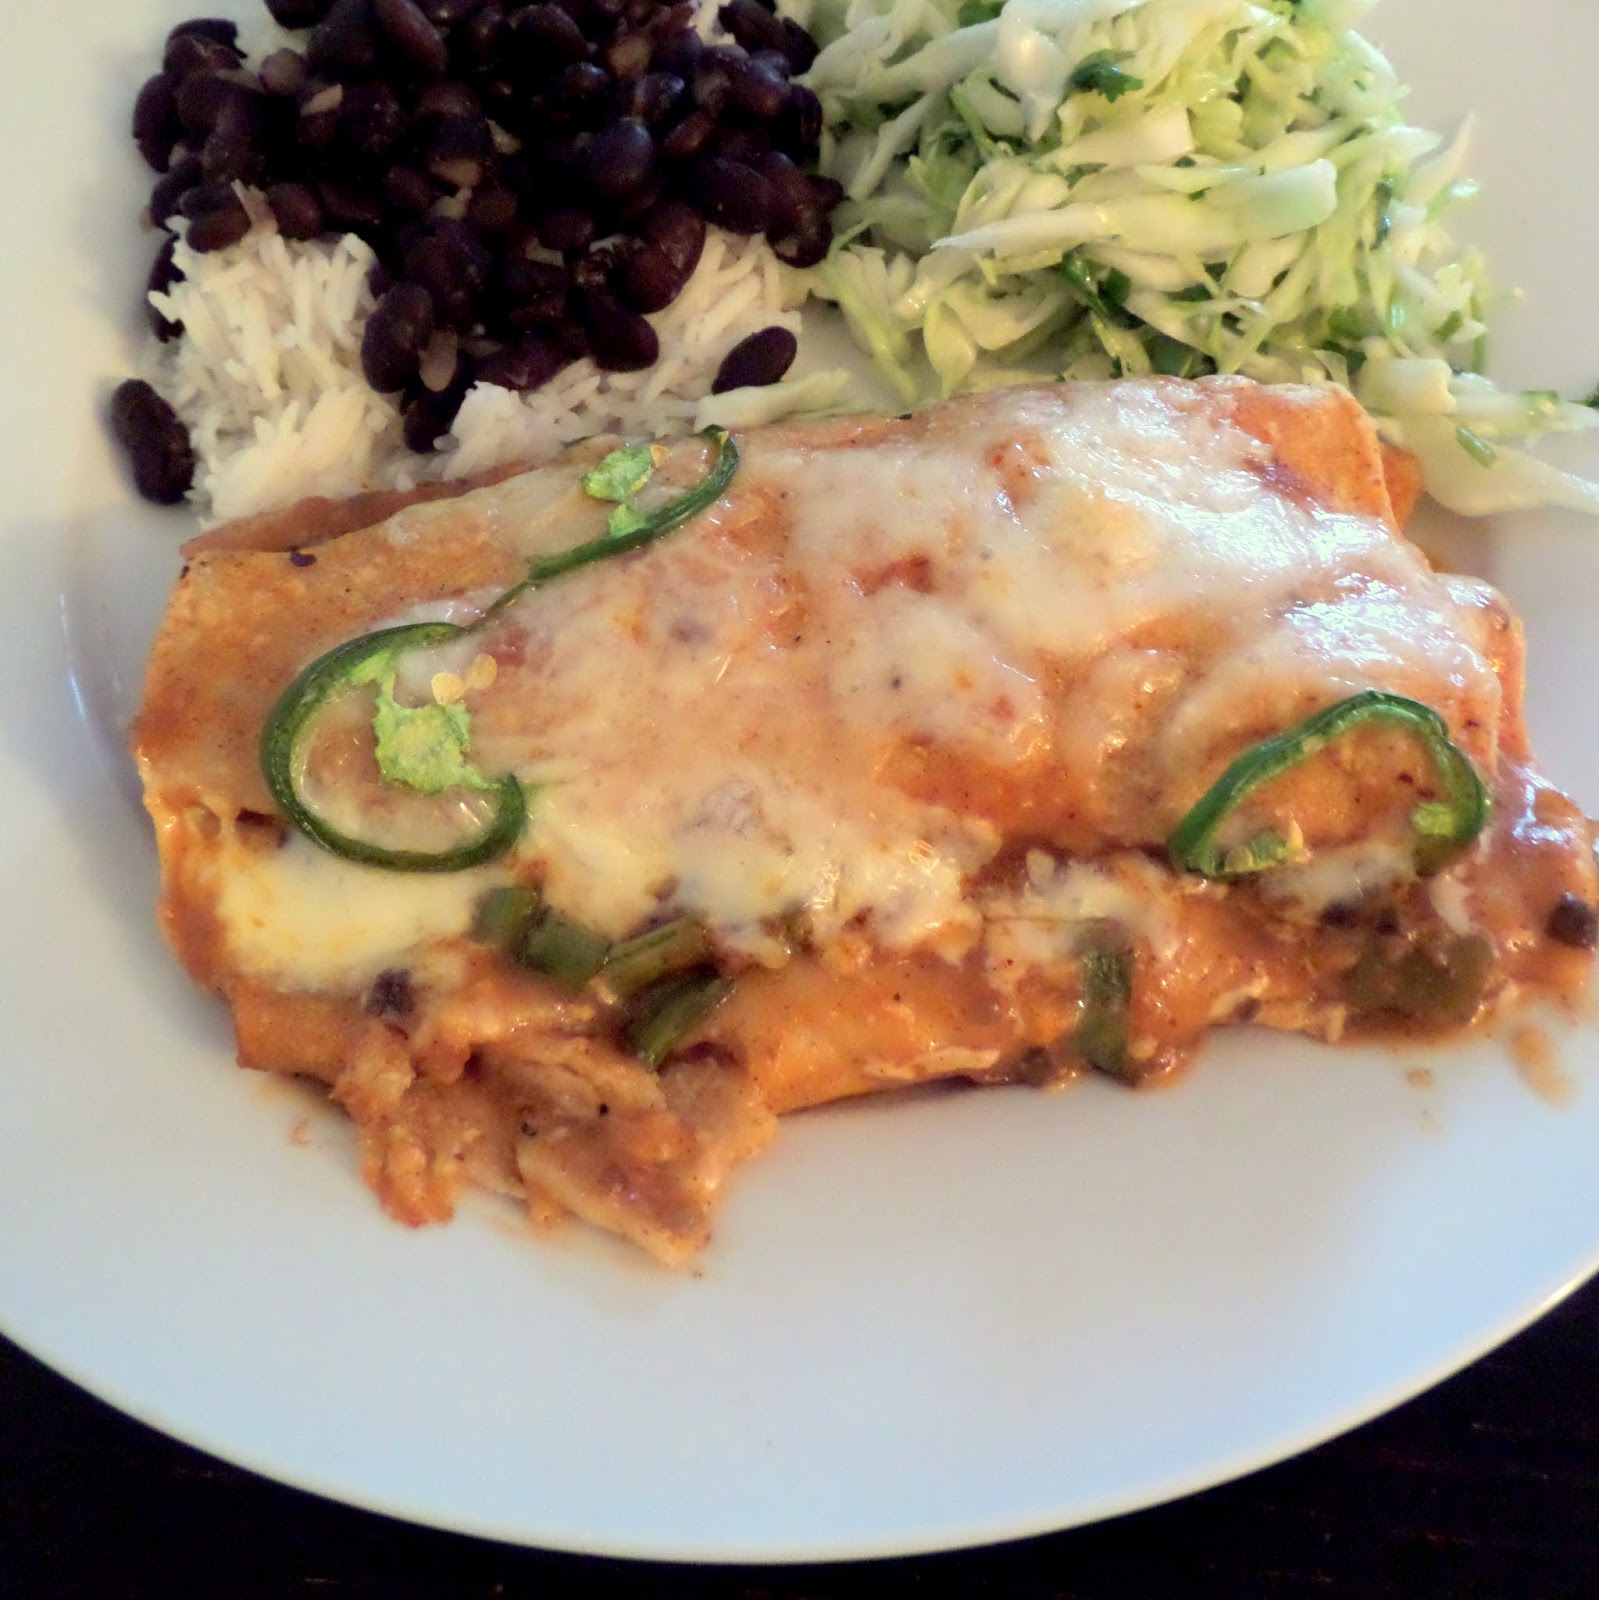 Chicken Enchiladas:  Corn tortillas rolled with chicken and cheese then smothered and baked in a chili sauce.